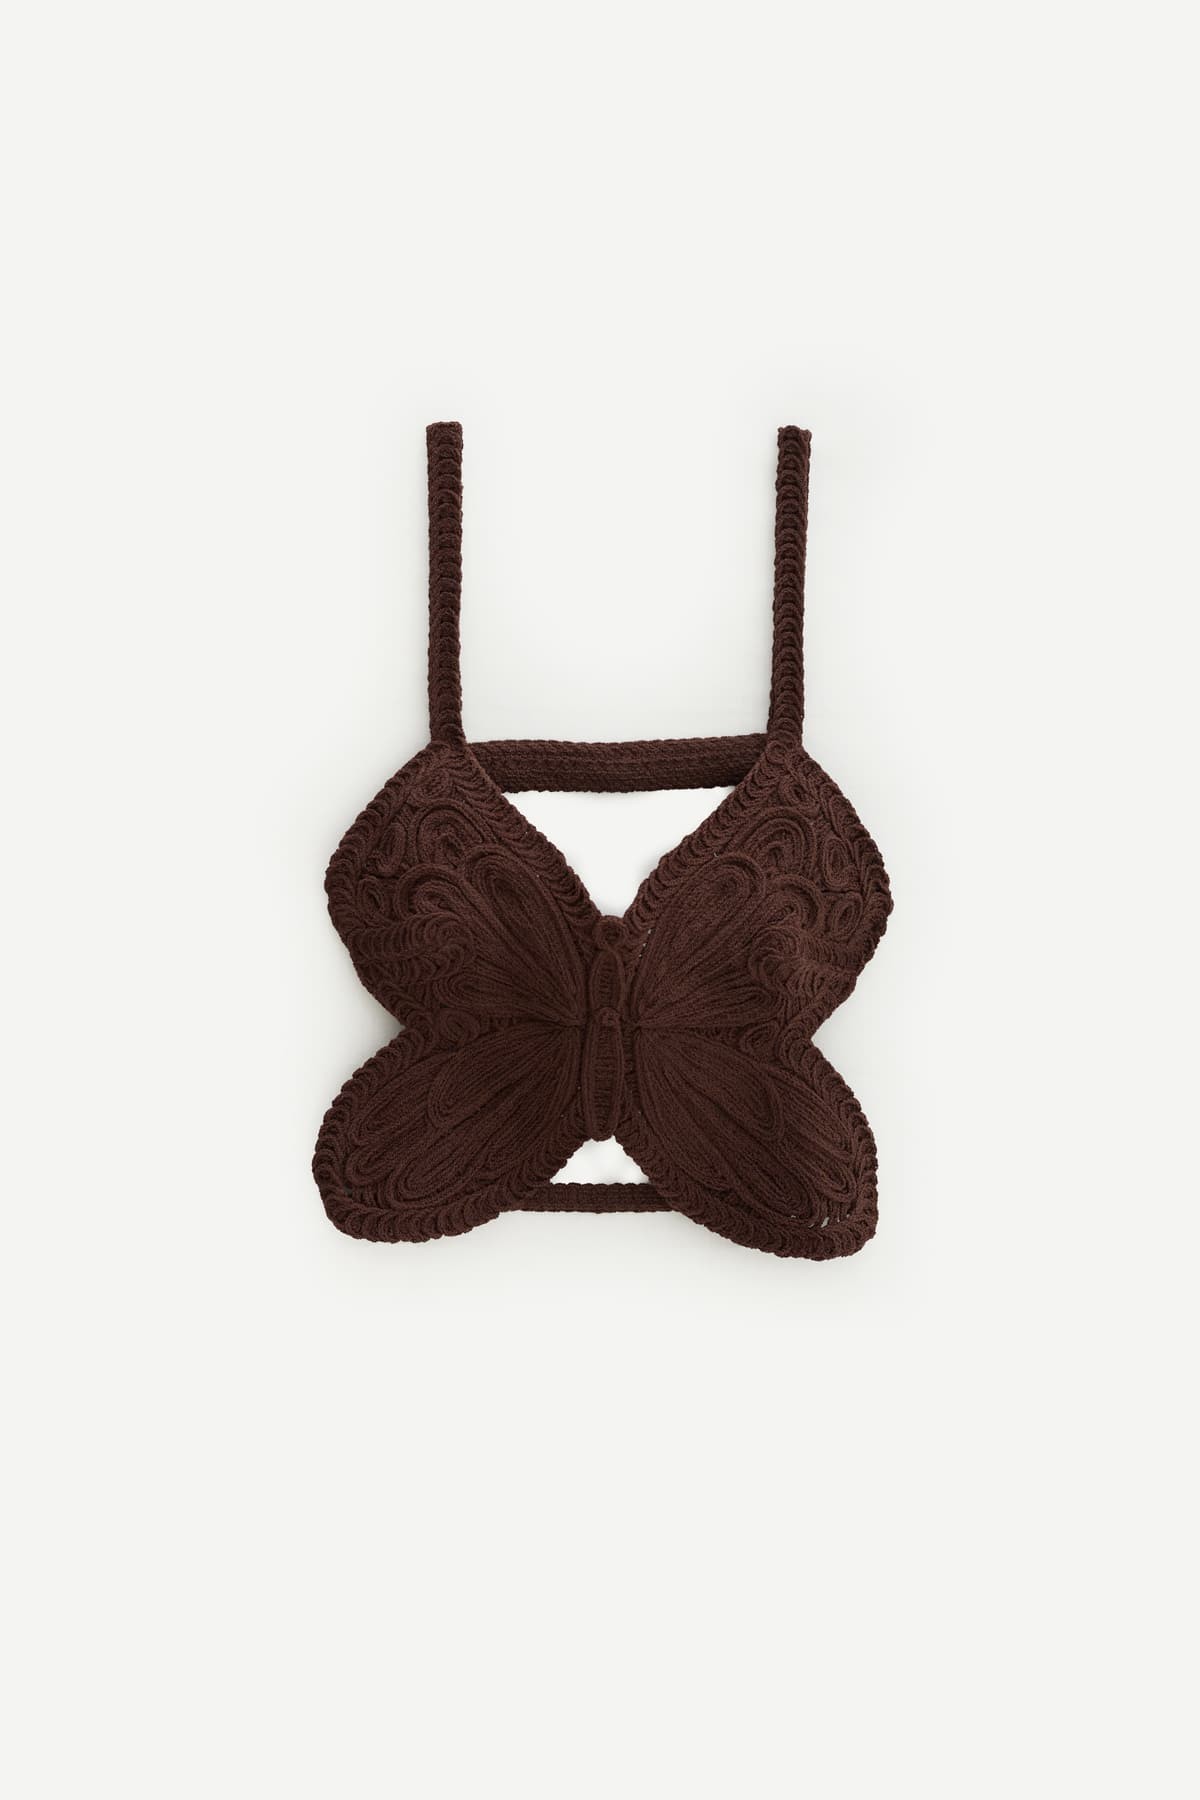 BLUMARINE CHOCOLATE BROWN EMBROIDERY BUTTERFLY CROPPED TOP IAMNUE